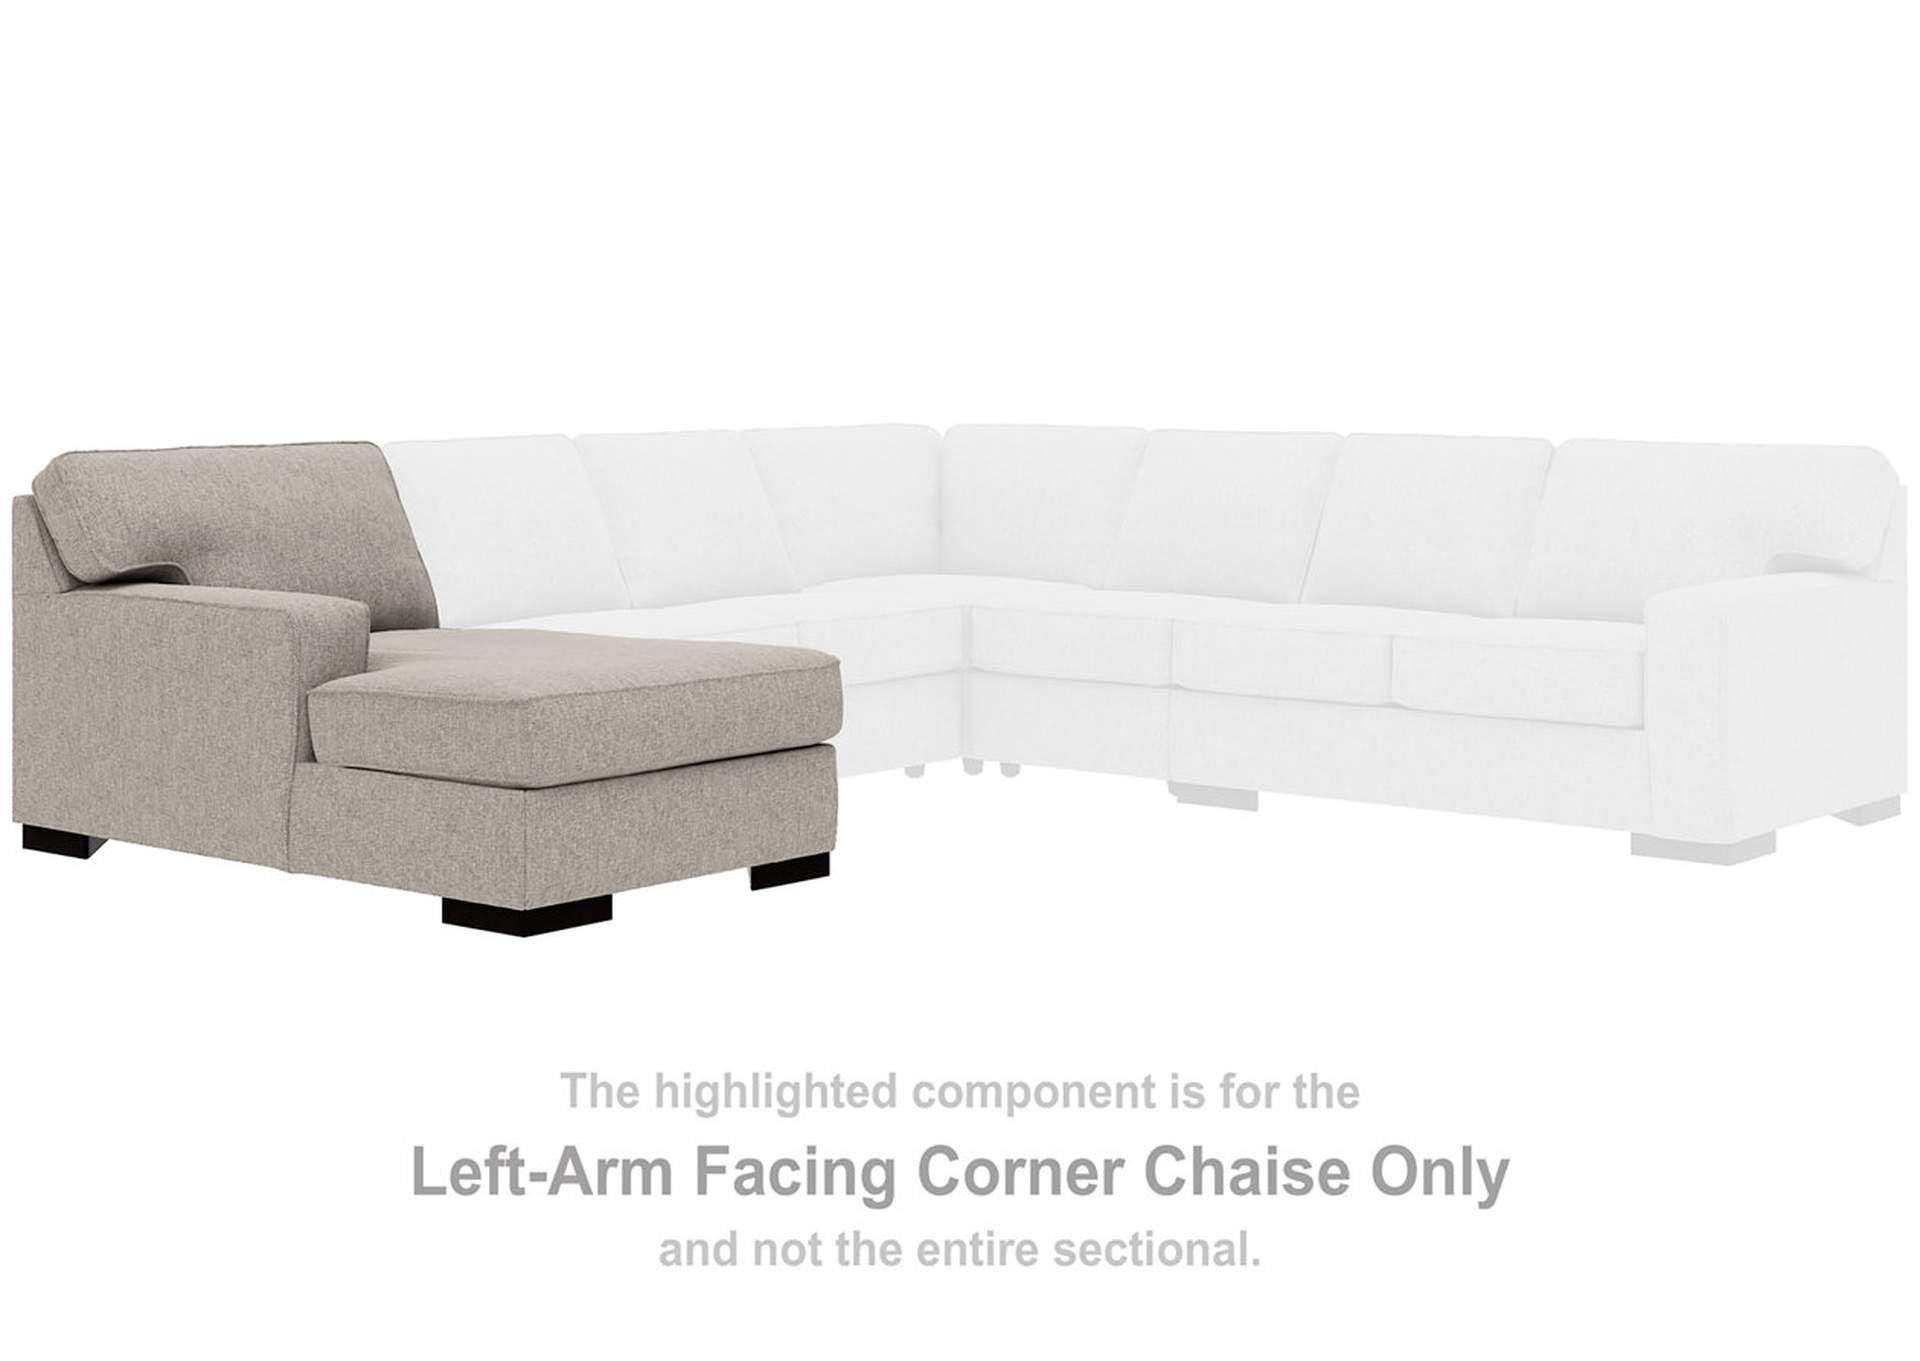 Ashlor Nuvella® 5-Piece Sectional with Chaise,Ashley